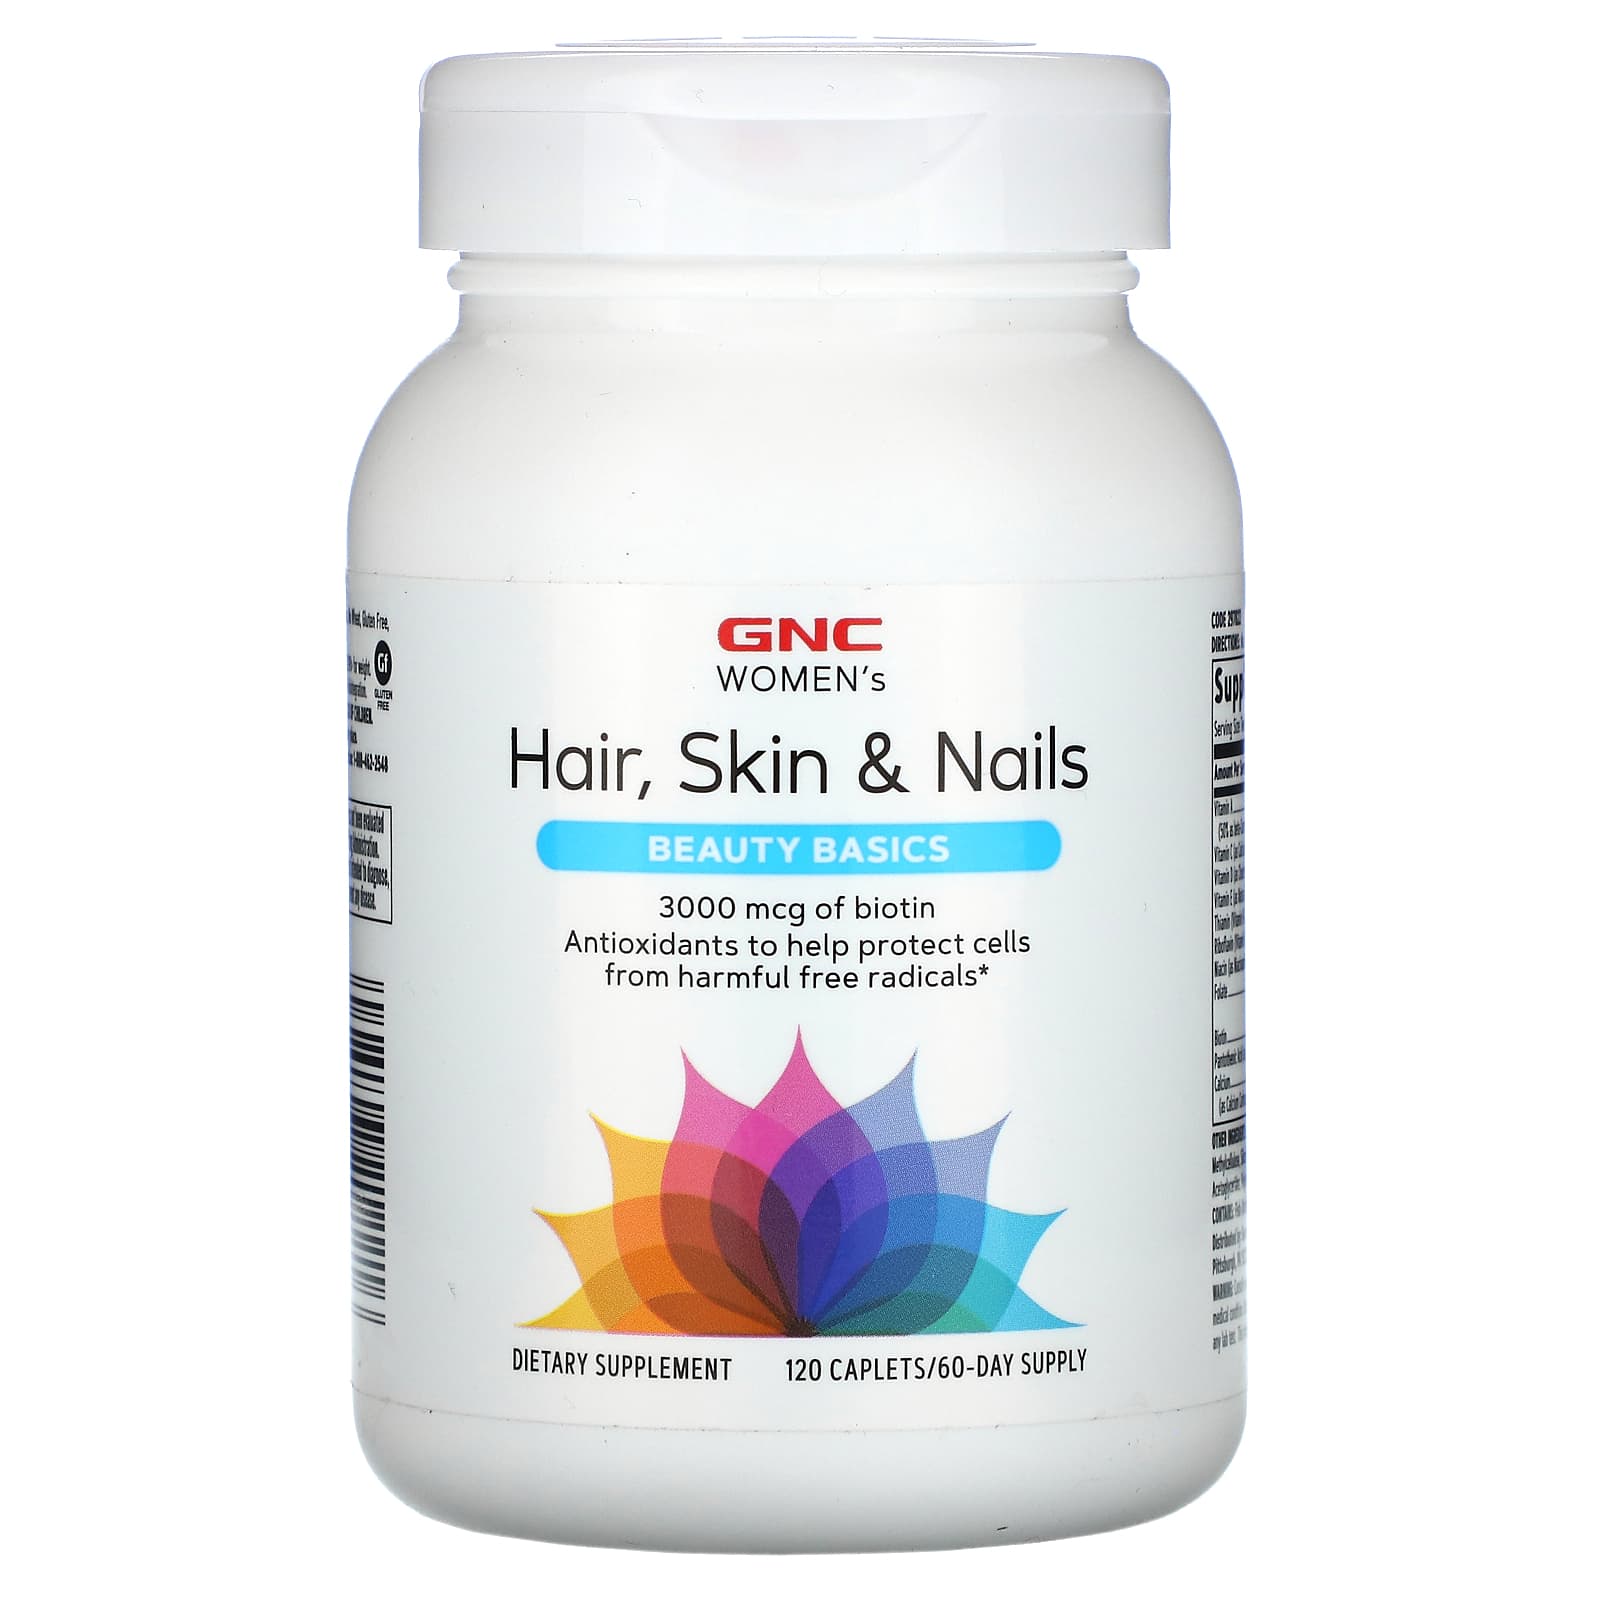 GNC Biotin 10000mcg for Healthy Hair, Skin & Nails | Tablet: Buy bottle of  90.0 tablets at best price in India | 1mg